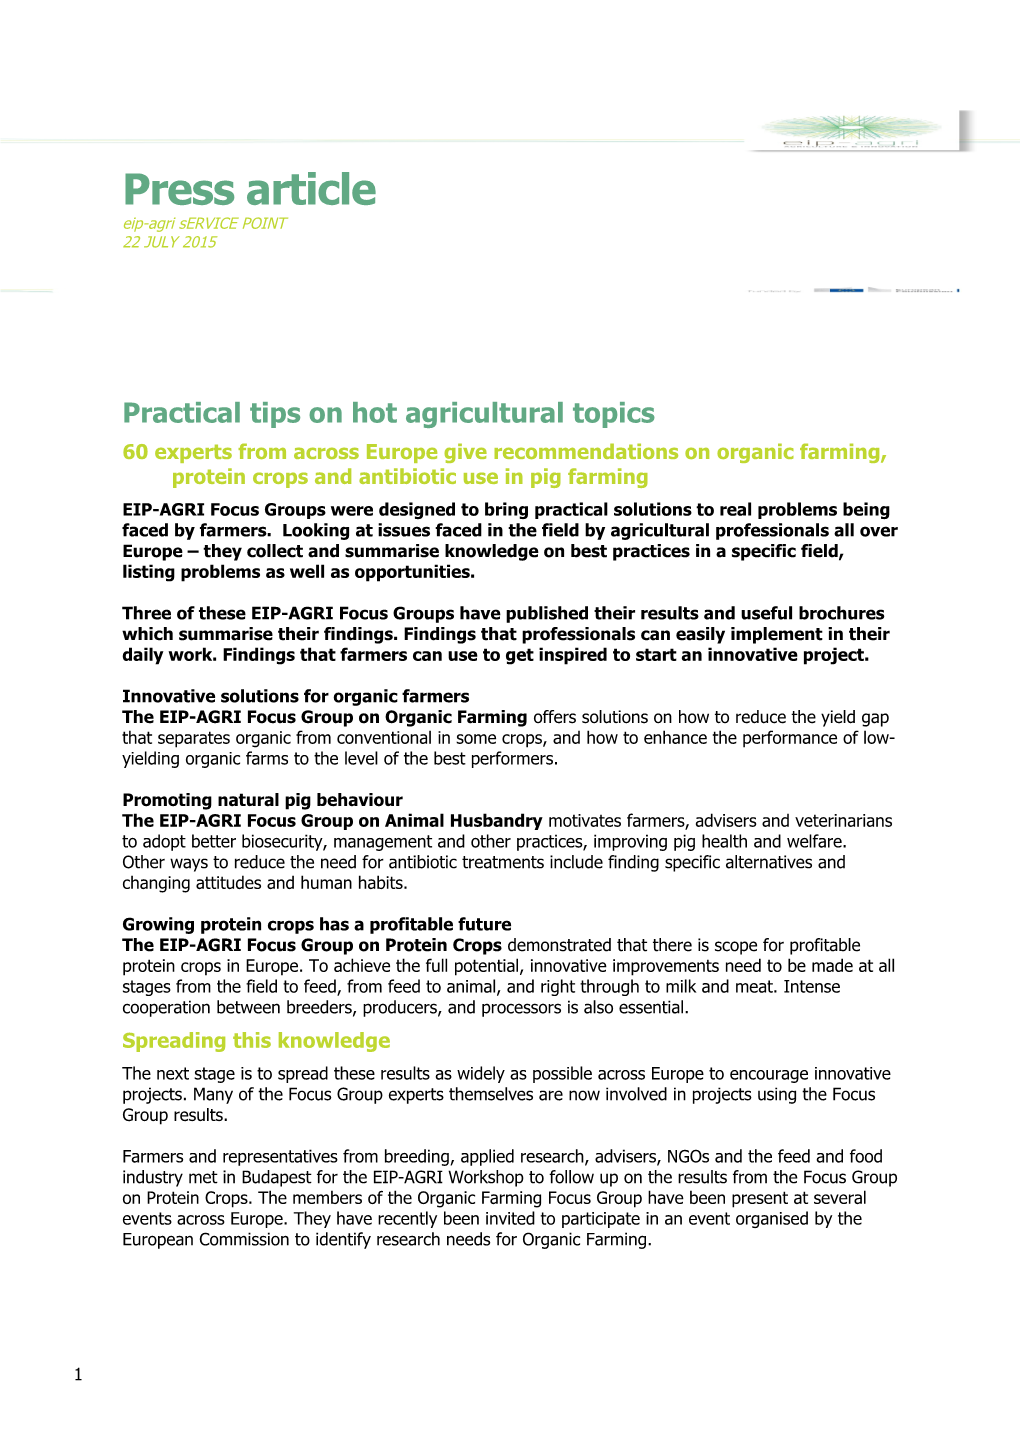 Practical Tips on Hot Agricultural Topics